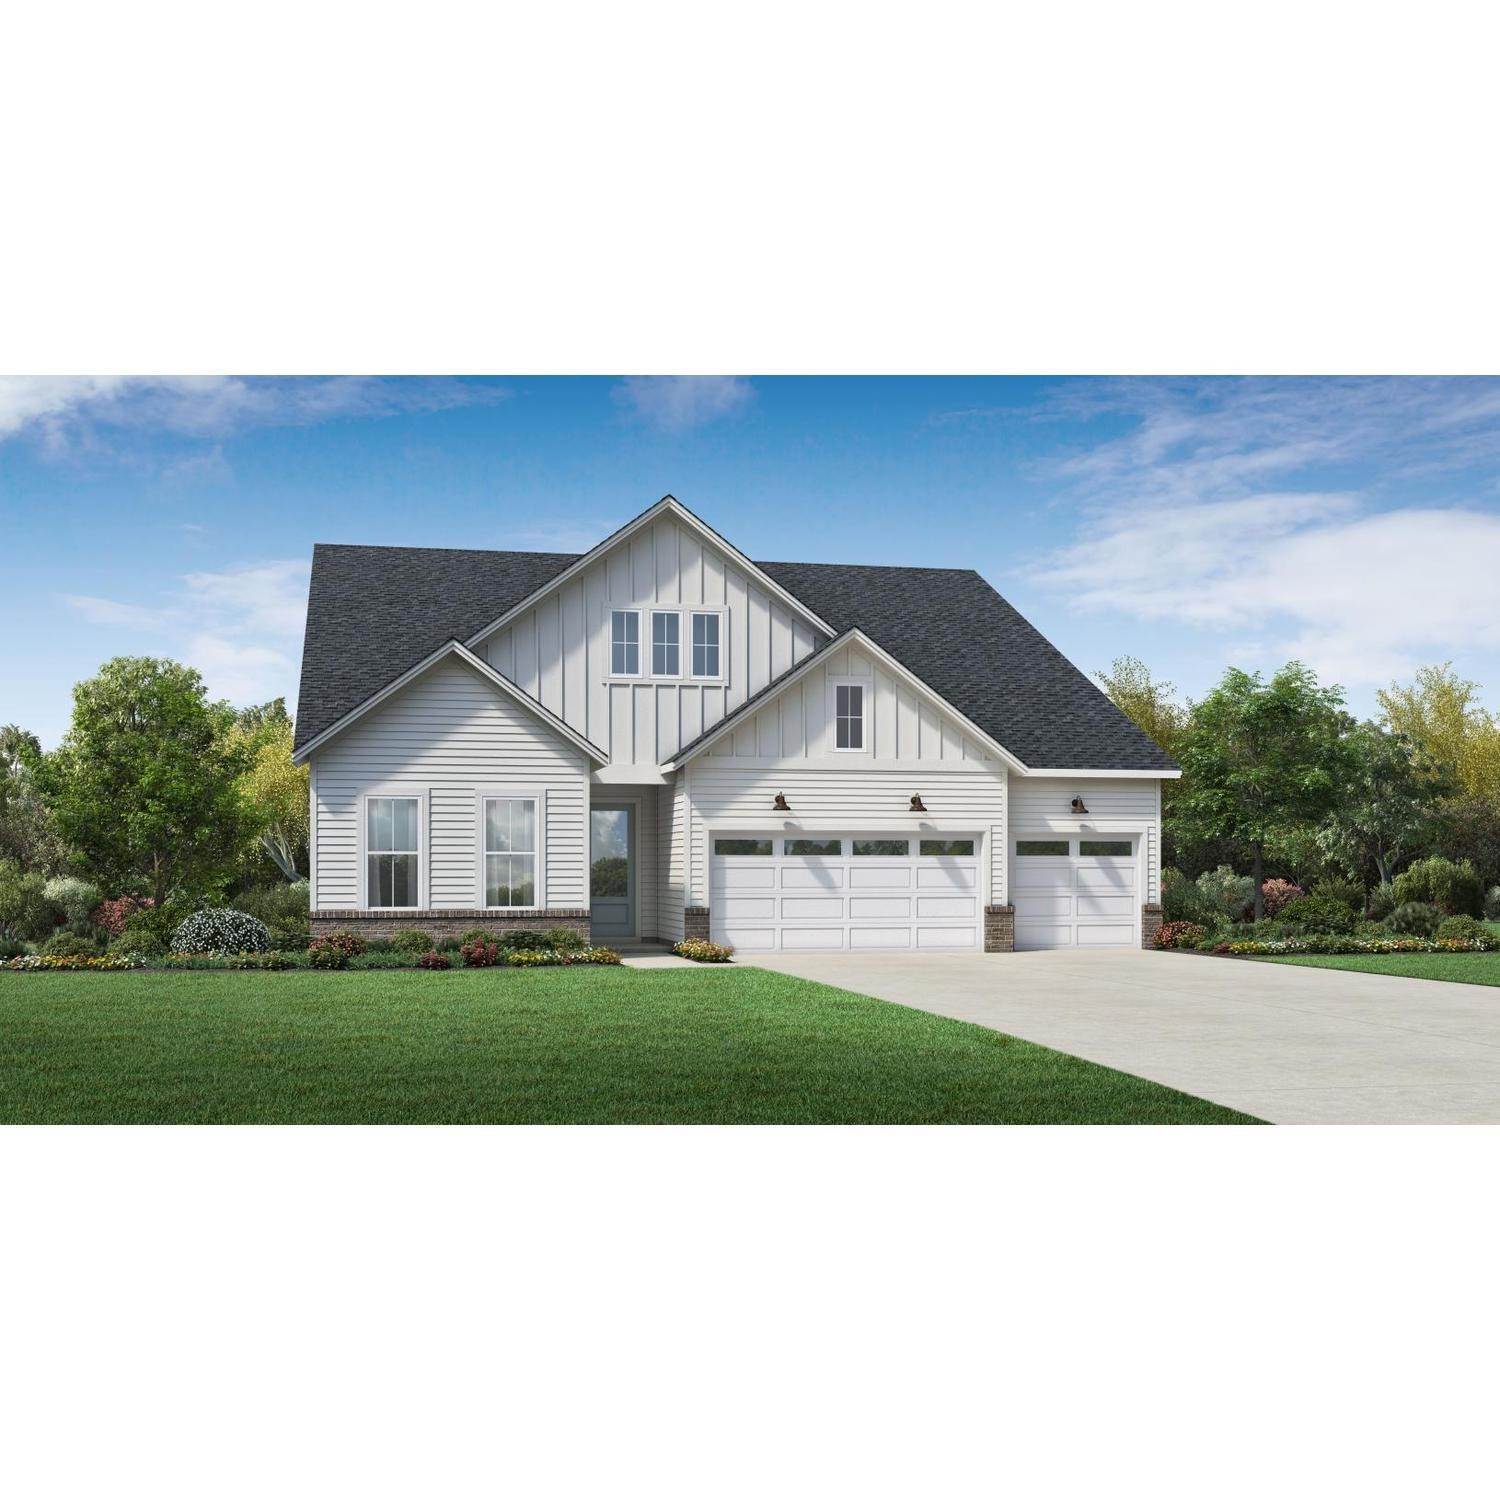 Single Family for Sale at Apex, NC 27539